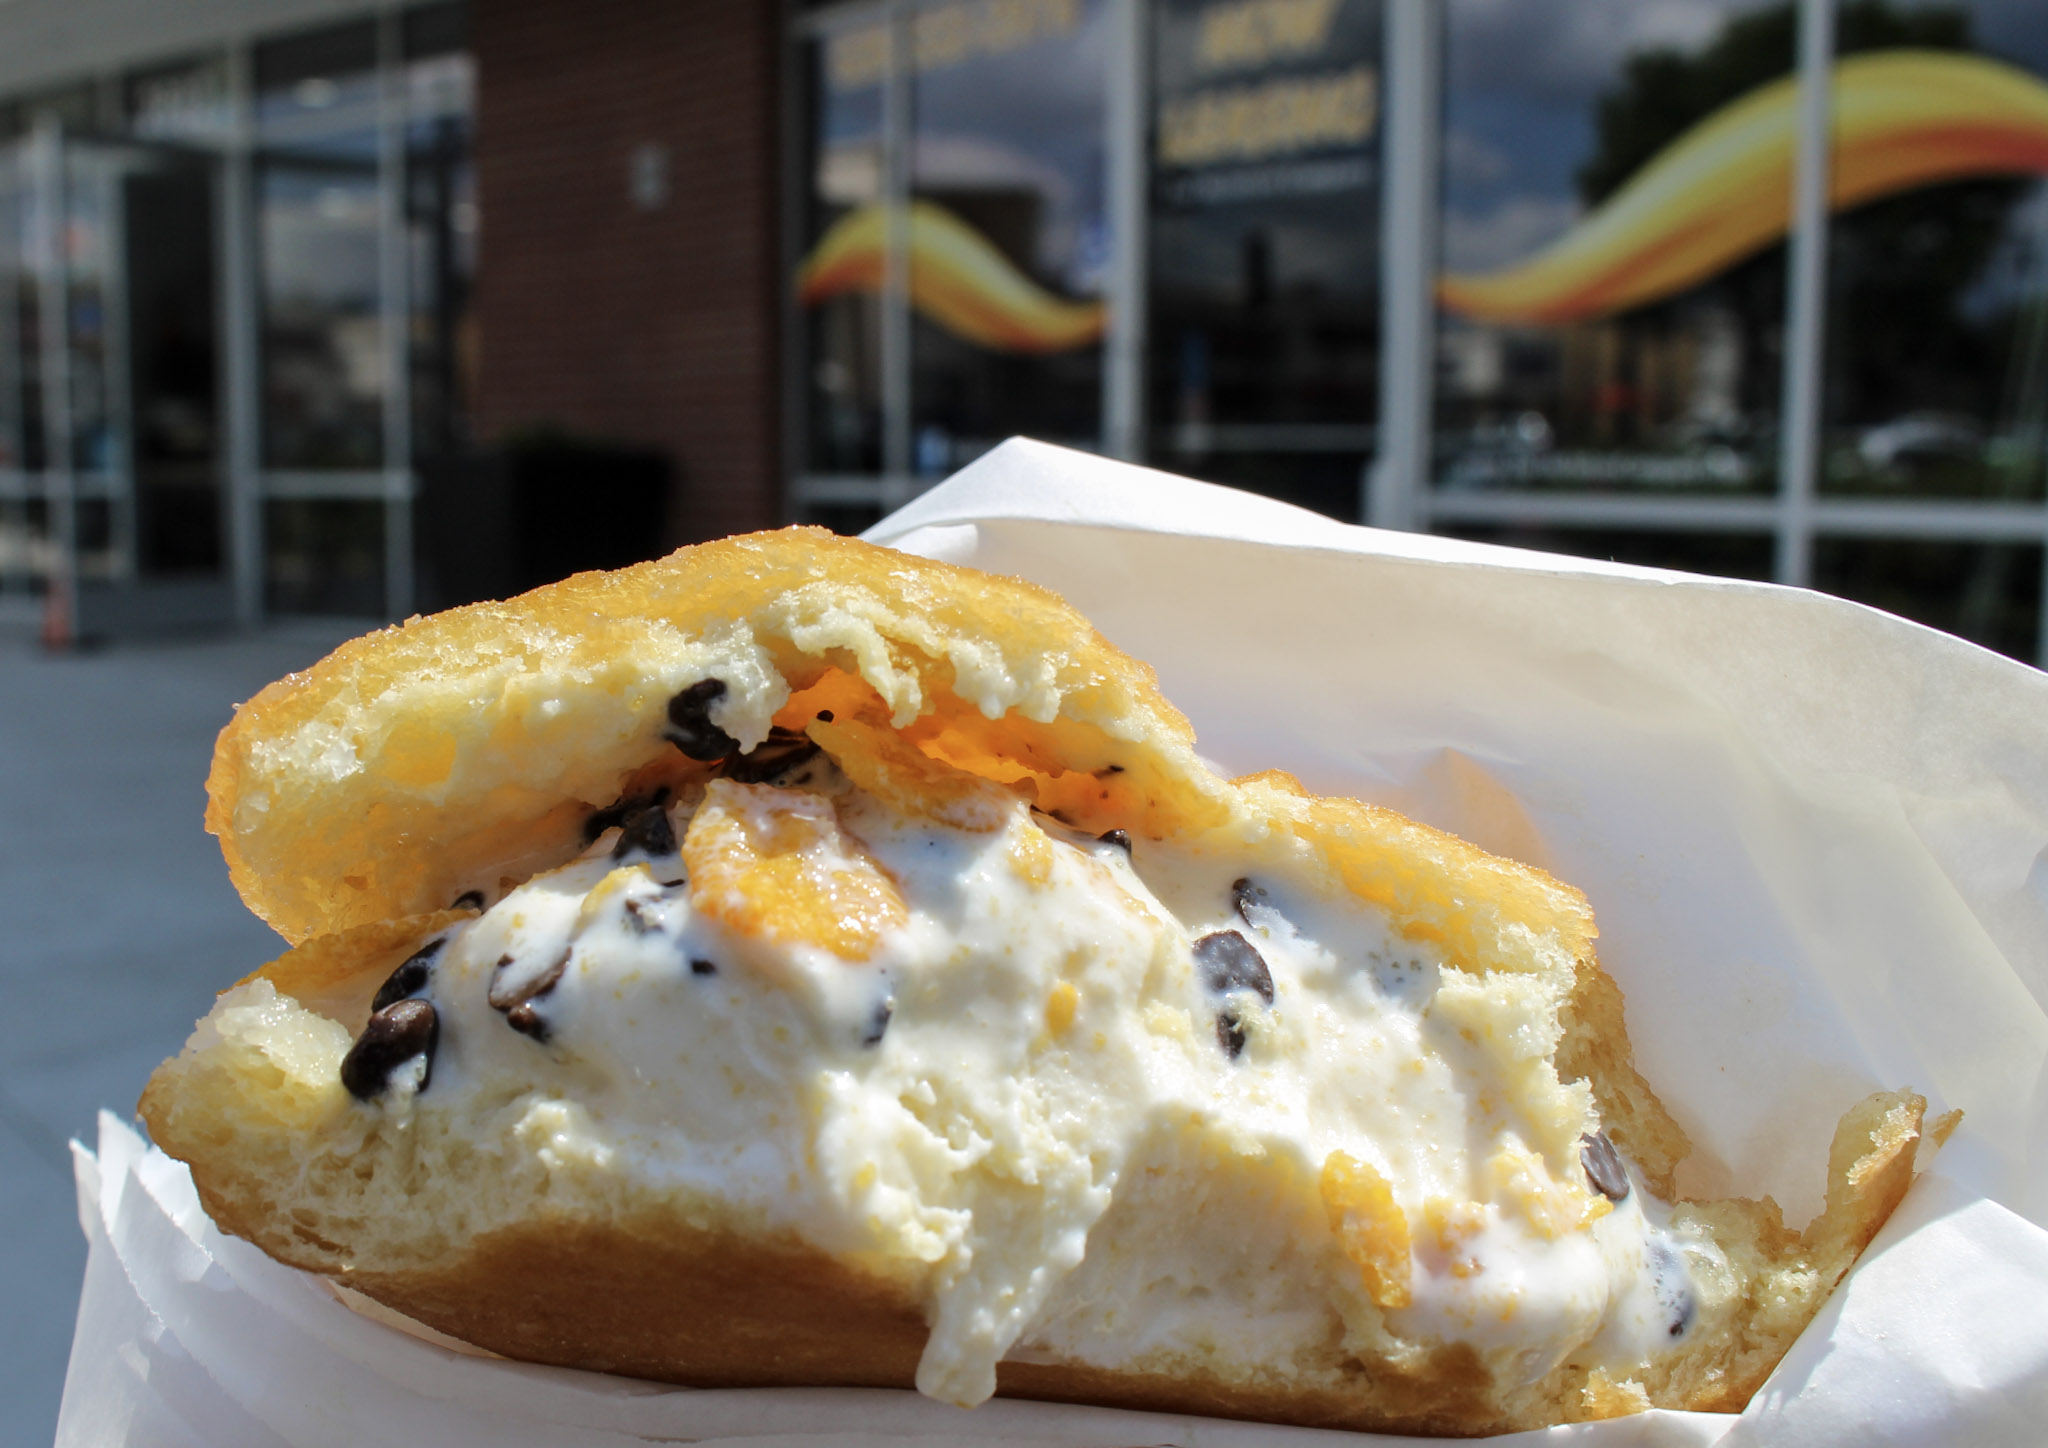 Review: Afters Ice Cream – The Mediocre Milky Bun